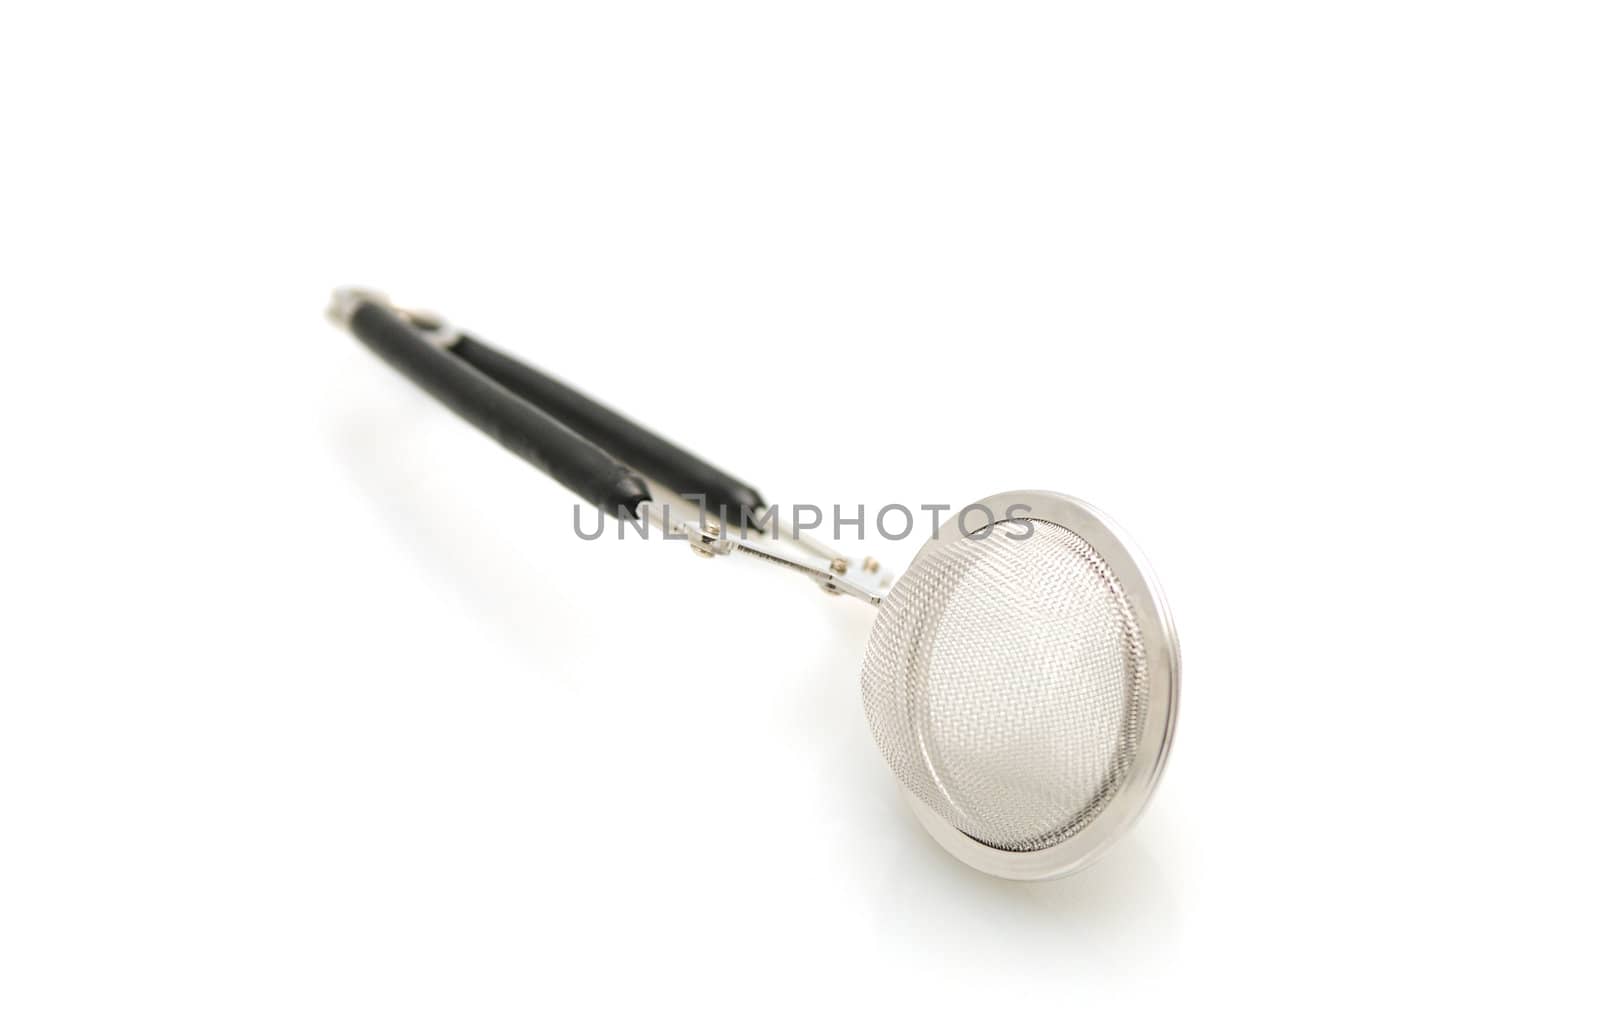 Tea strainer on white background by ftlaudgirl